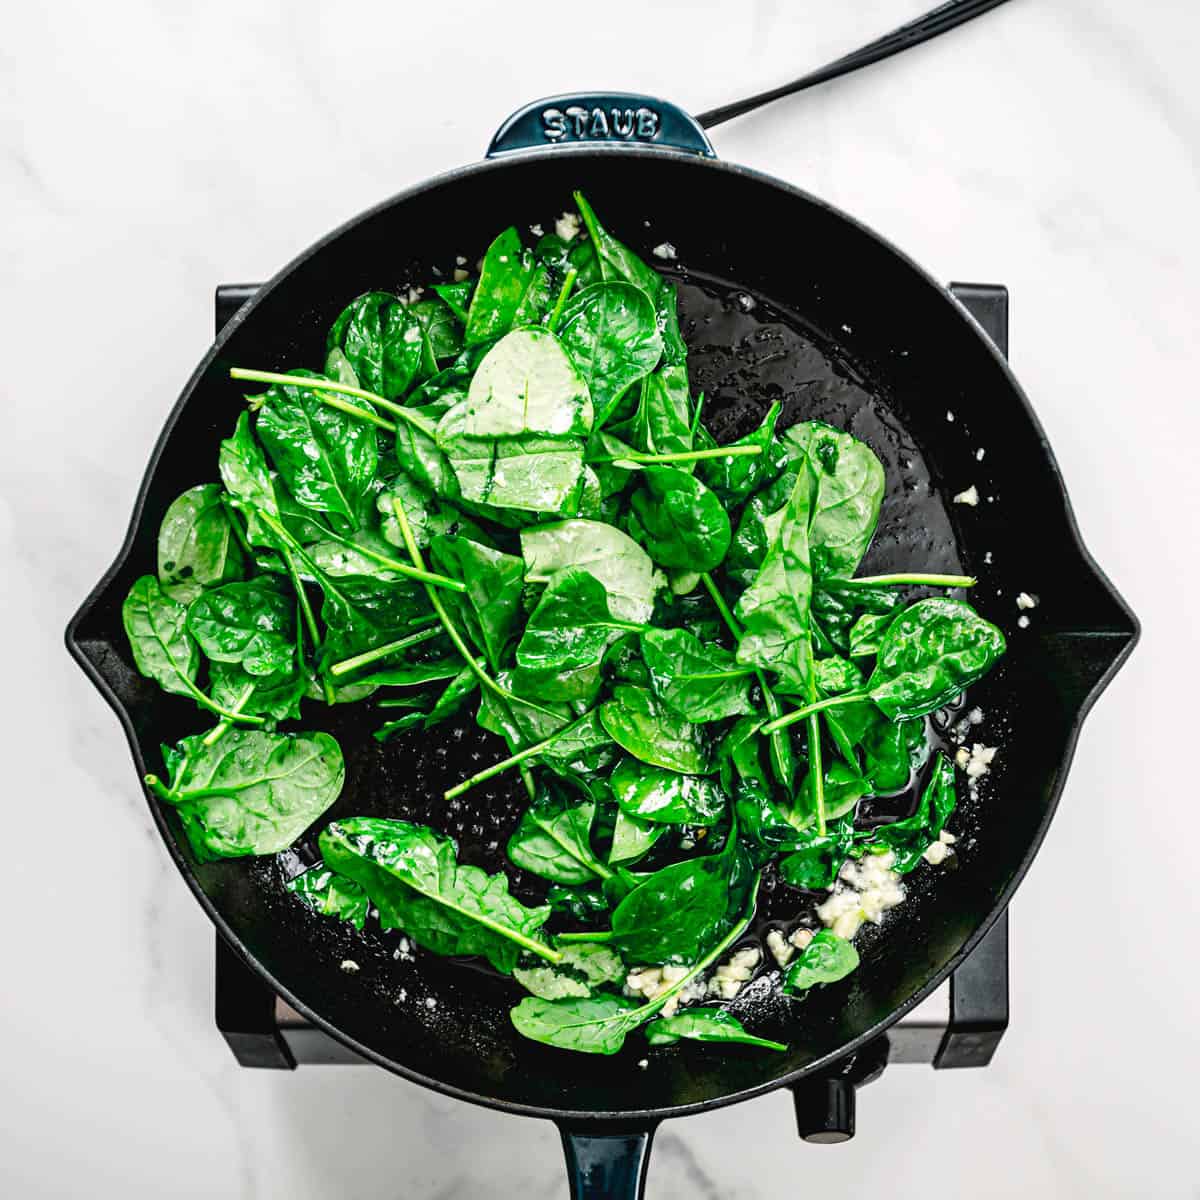 Add spinach and stir for about 30-40 seconds. Do not overcook. 